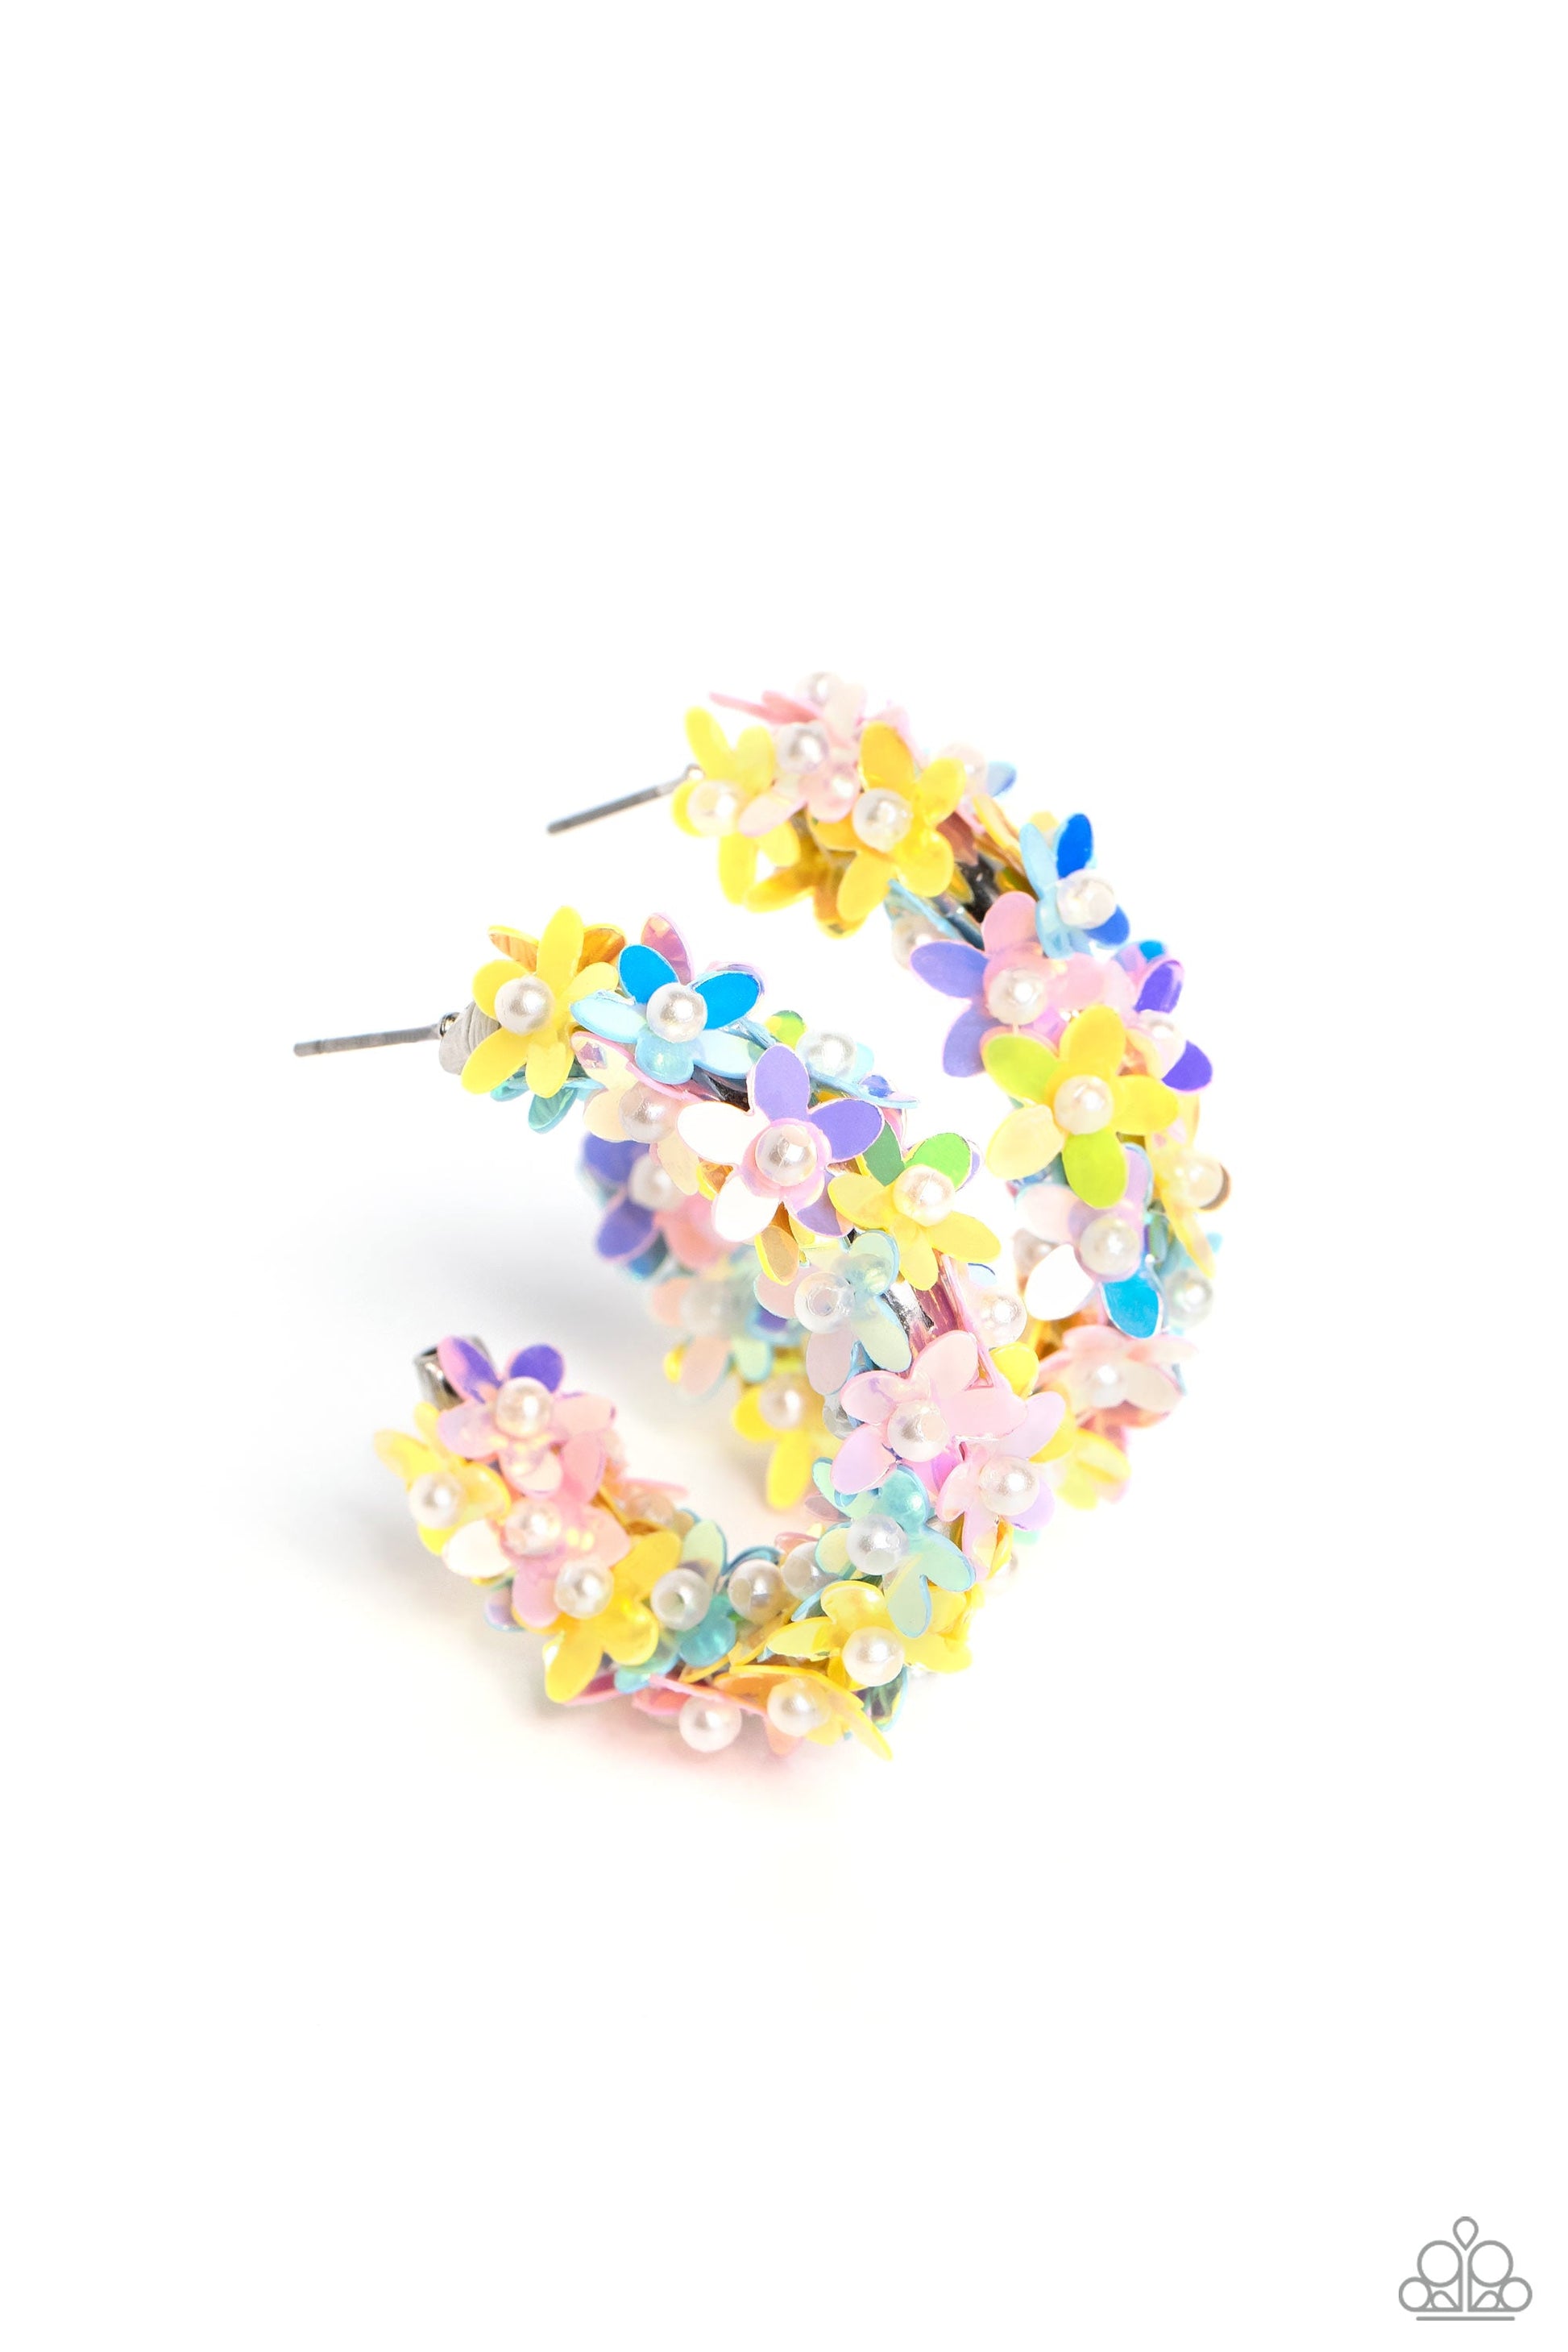 Fairy Fantasia - Multi Color Floral Hoop Earrings - Paparazzi Accessories - A floral explosion, encompassing the entirety of a thick silver hoop, features reflective light blue, pink, and yellow flowers dotted with dainty pearl centers for a dreamy, whimsicality below the ear. Earring attaches to a standard post fitting. Hoop measures approximately 1 1/2" in diameter.